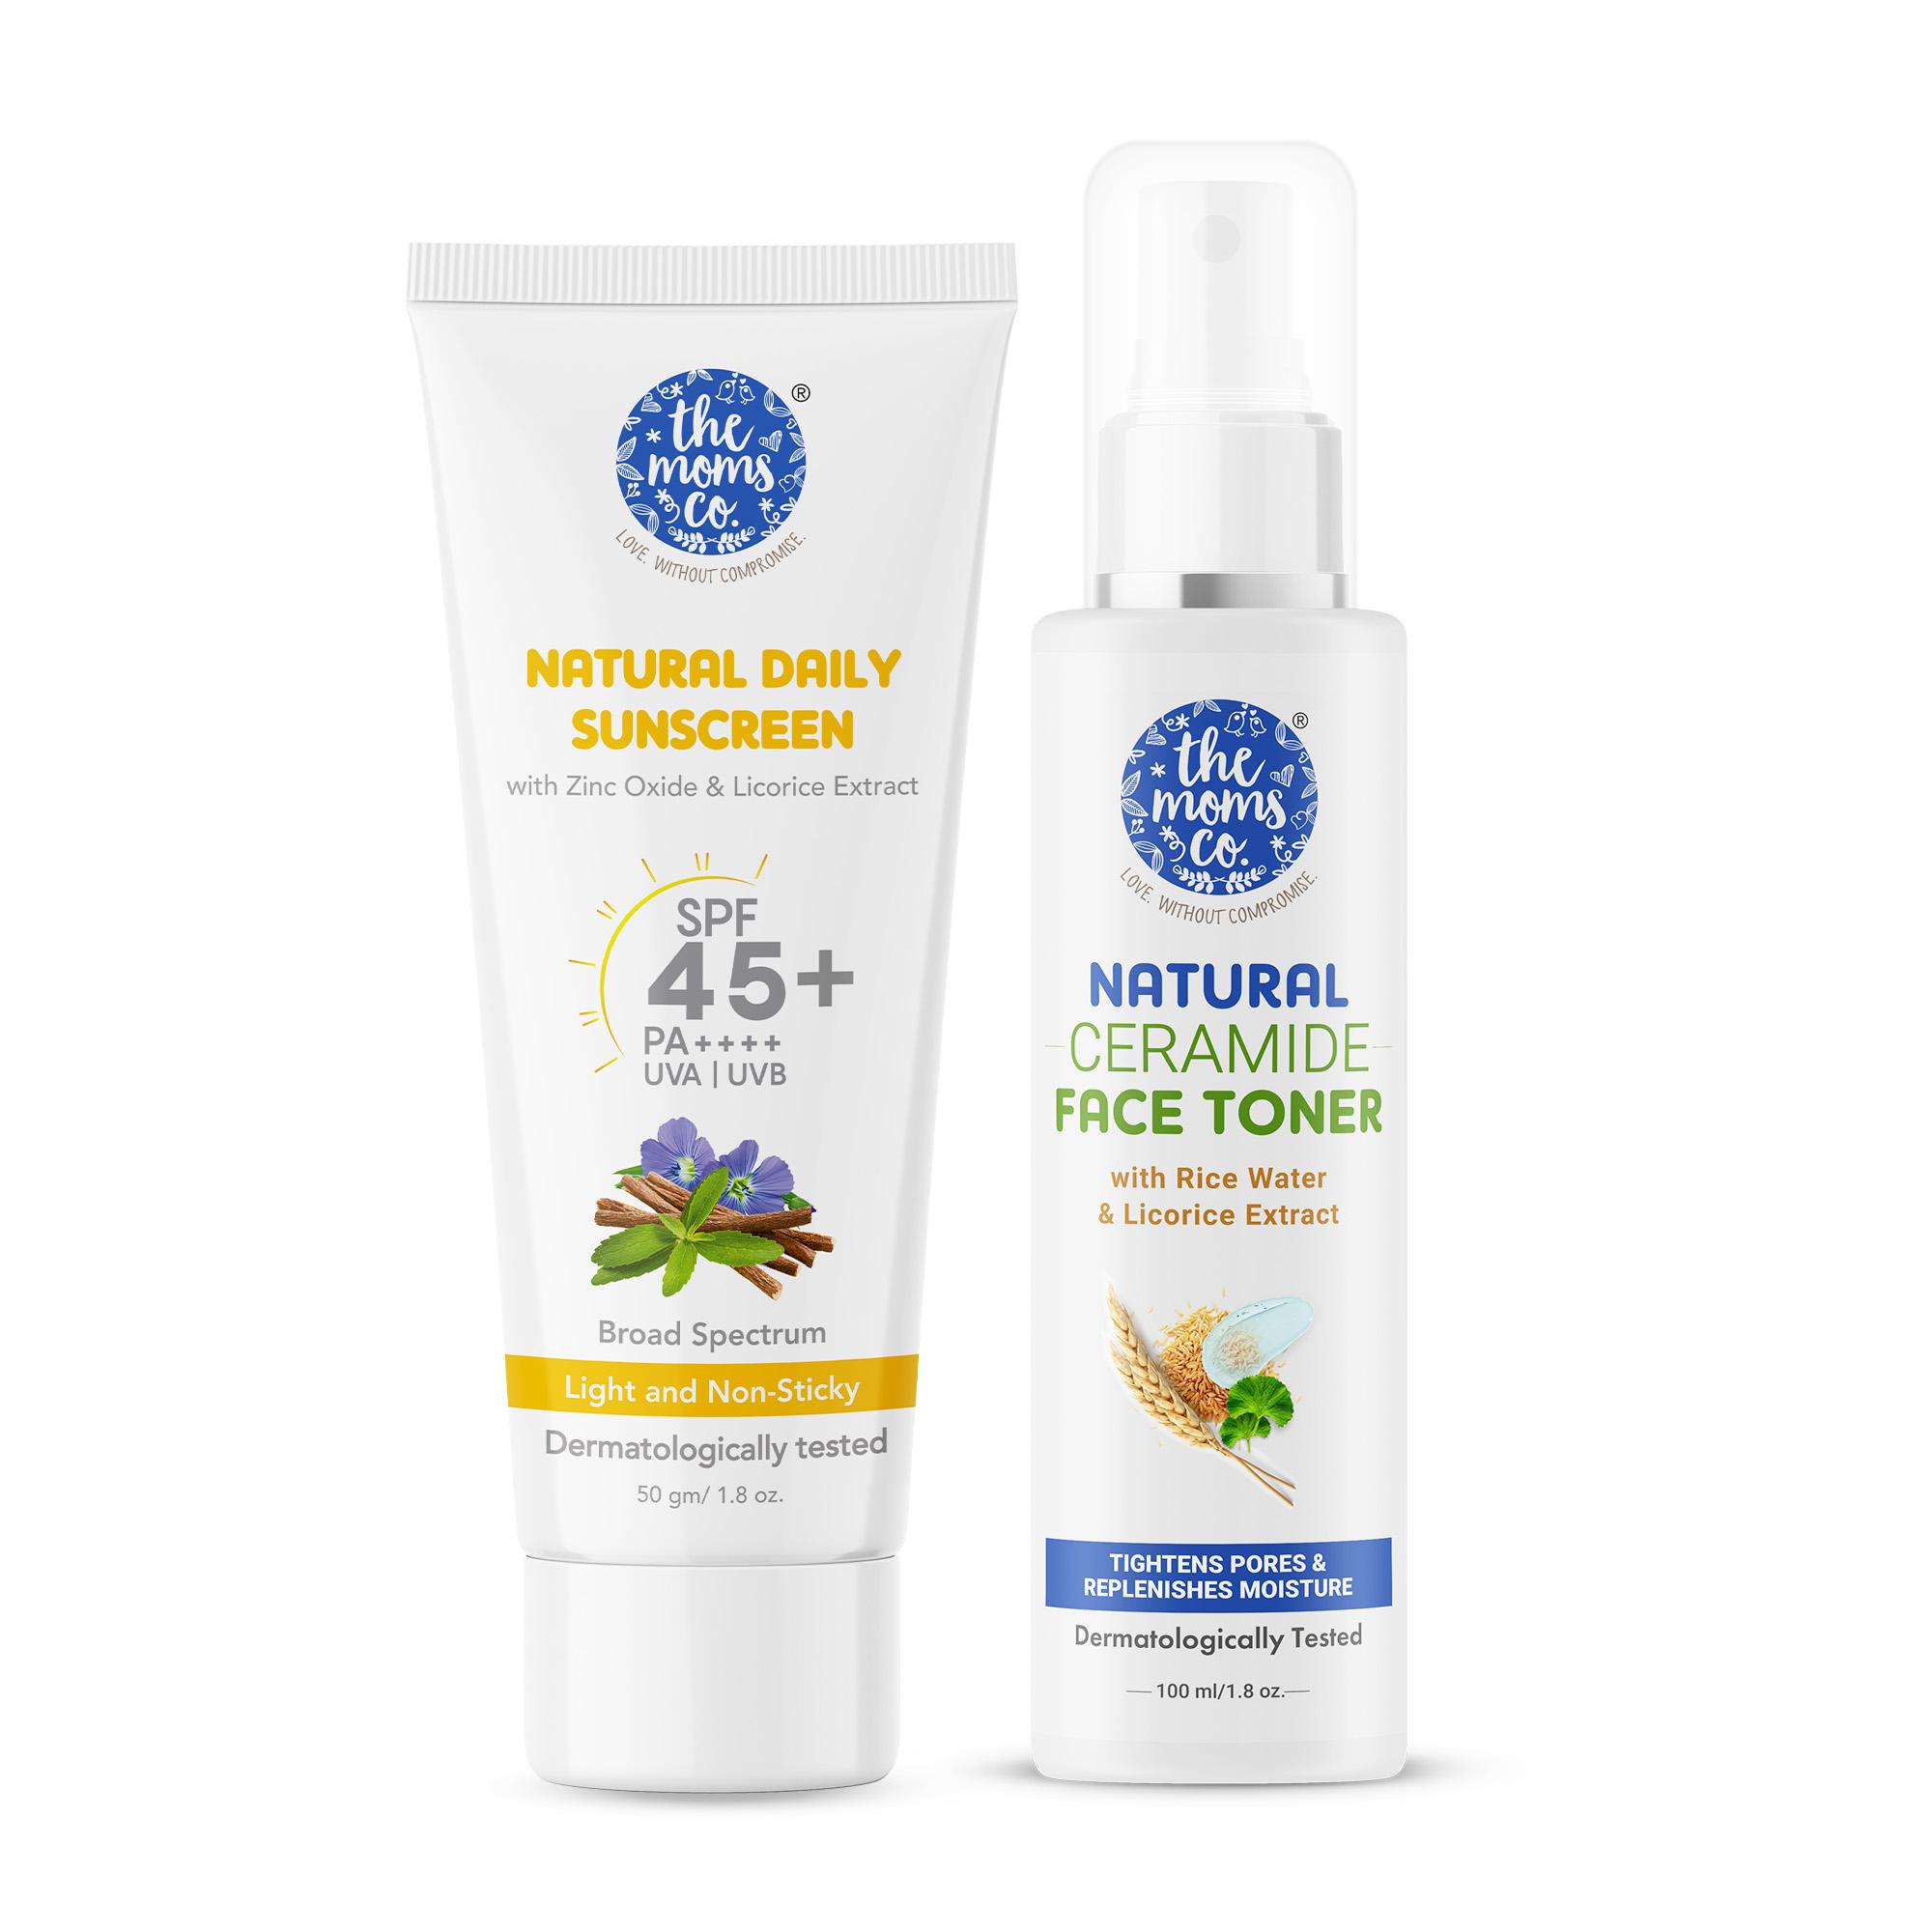 The Mom's Co. | The Mom's Co. Natural Ceramide Face Toner & Mineral Sunscreen With 25% Zinc Oxide Spf 45+ Pa Combo